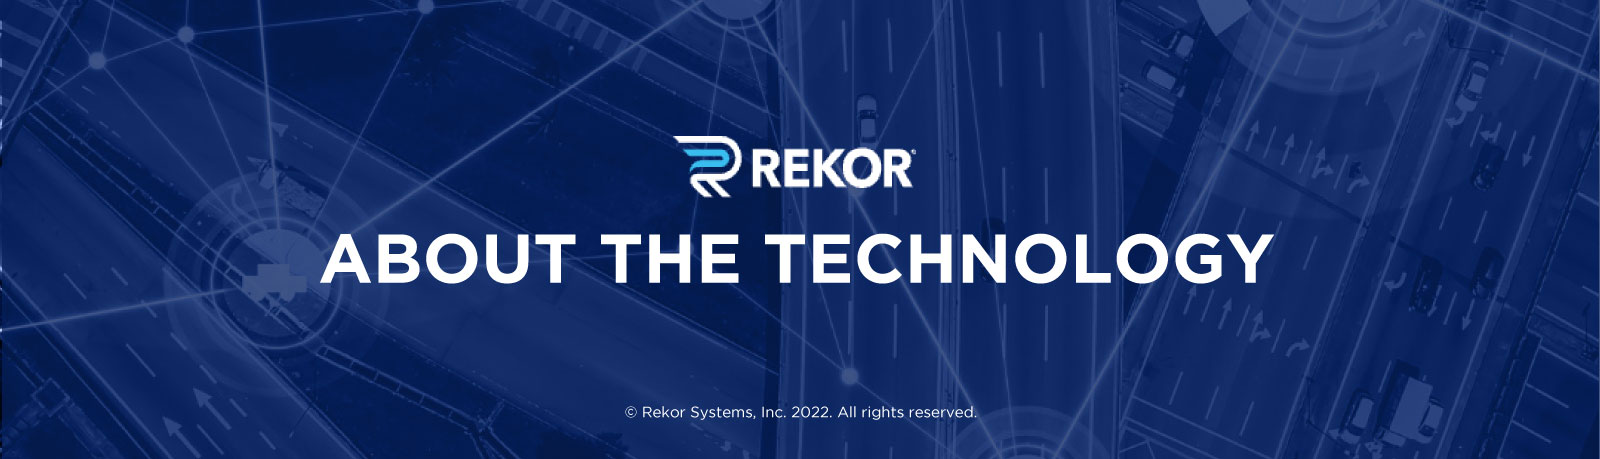 Rekor: About the technology